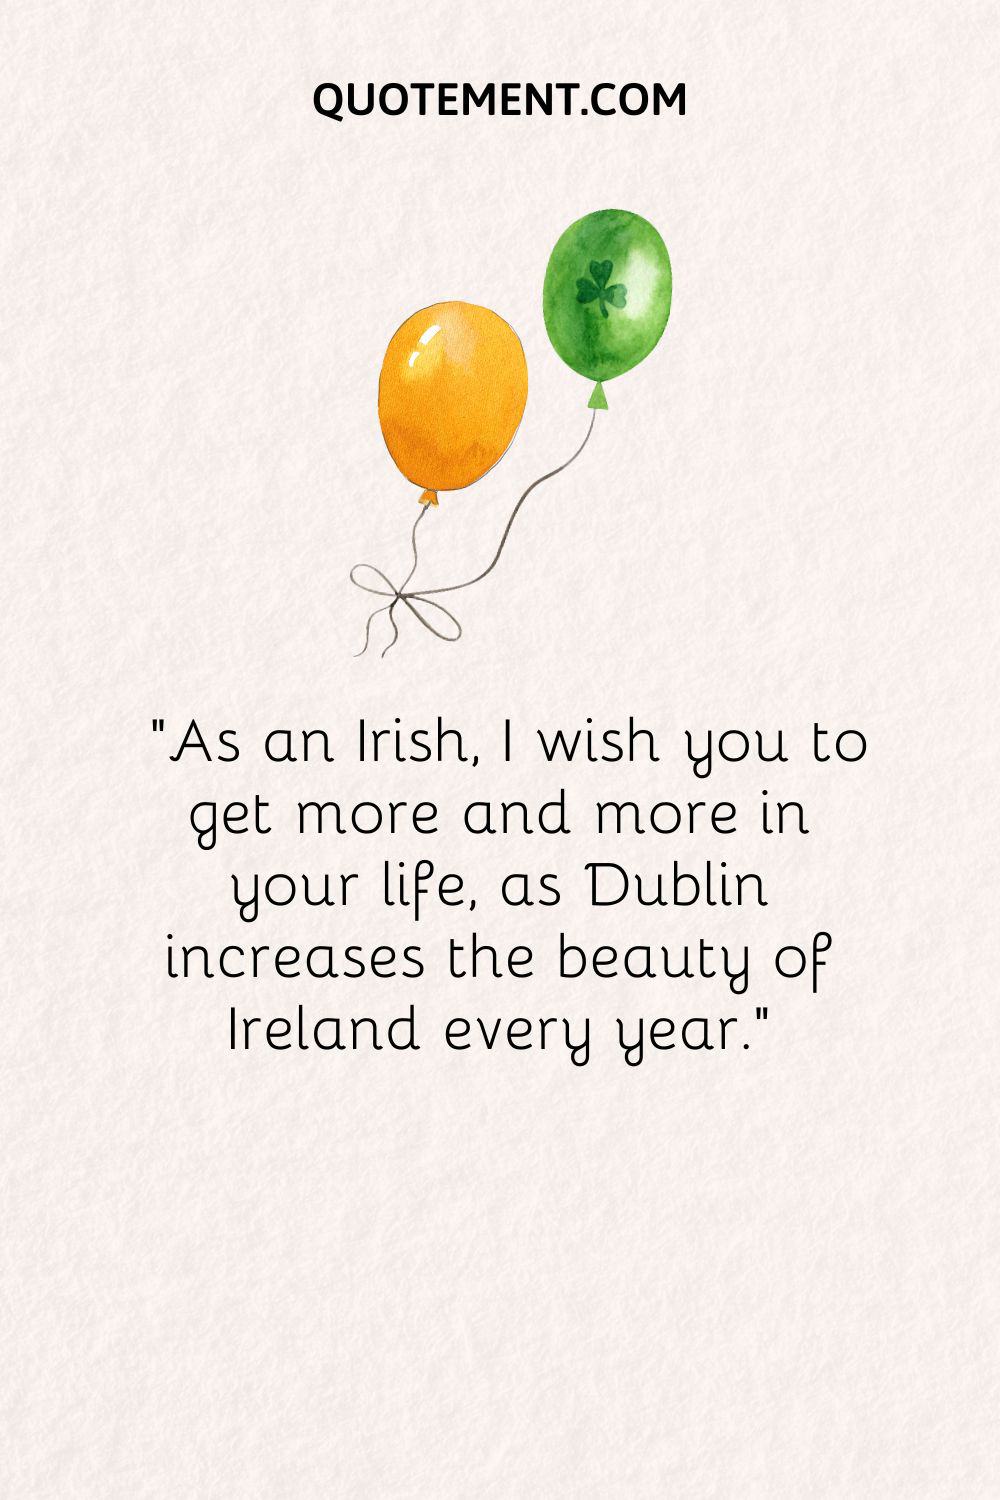 As an Irish, I wish you to get more and more in your life, as Dublin increases the beauty of Ireland every year.